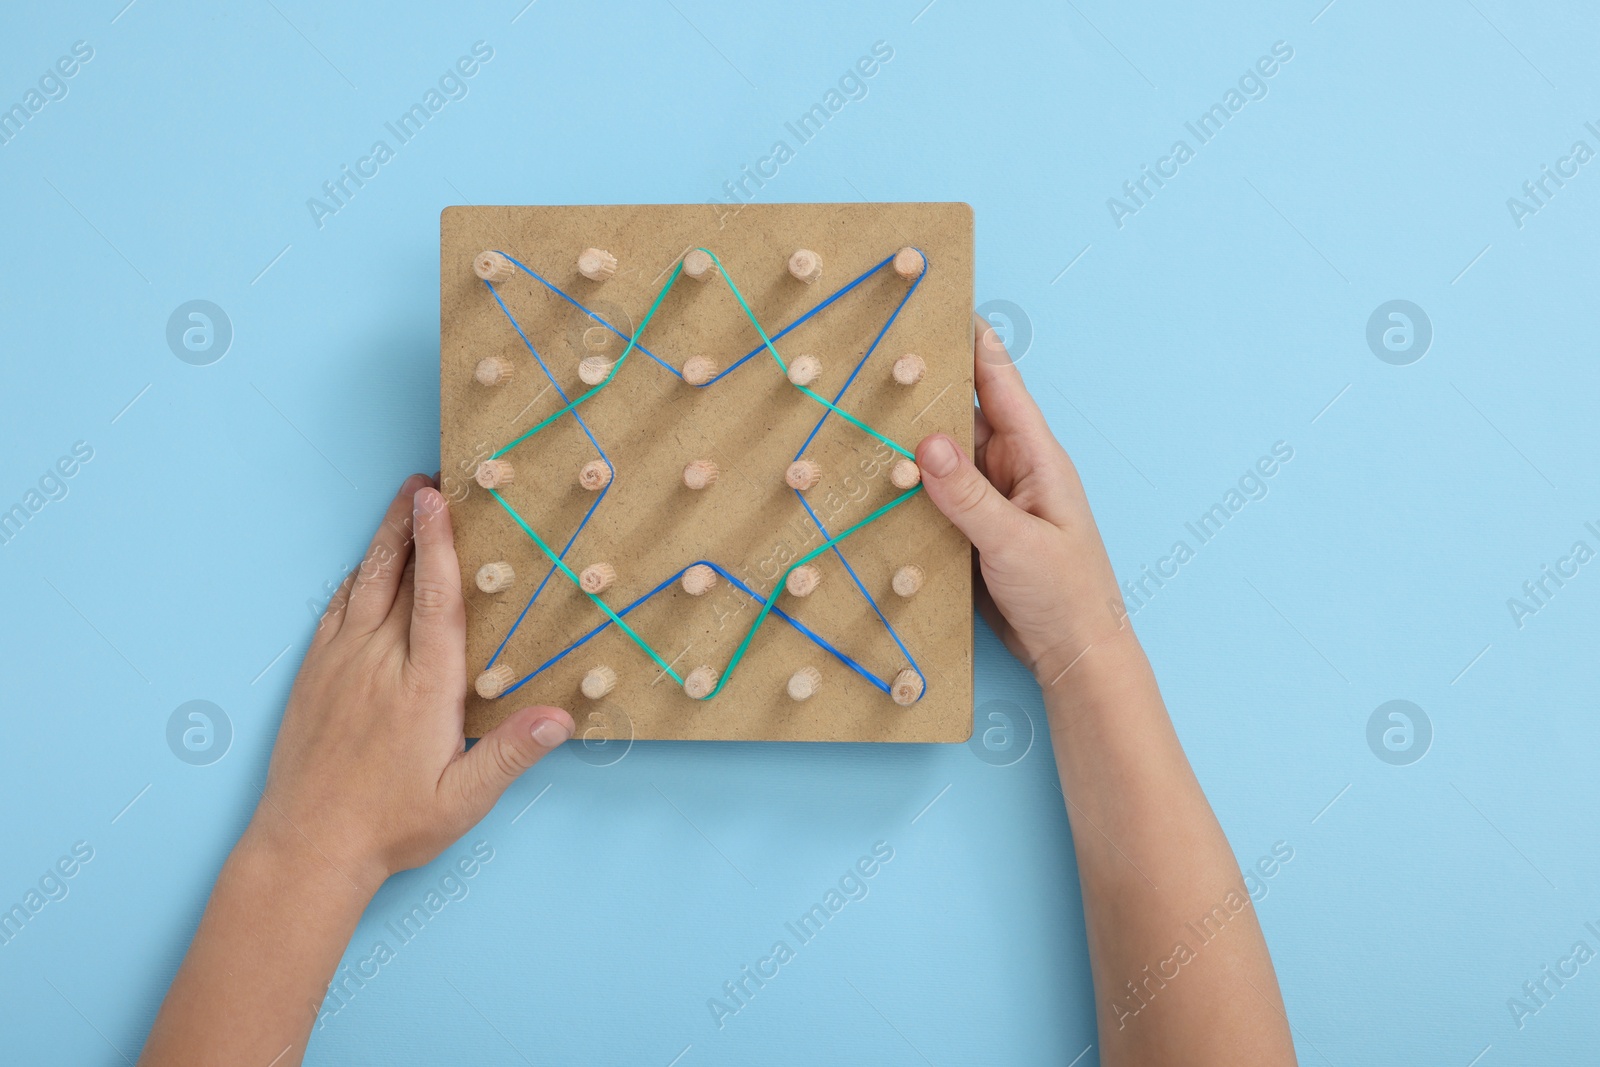 Photo of Motor skills development. Boy with geoboard and rubber bands at light blue table, top view